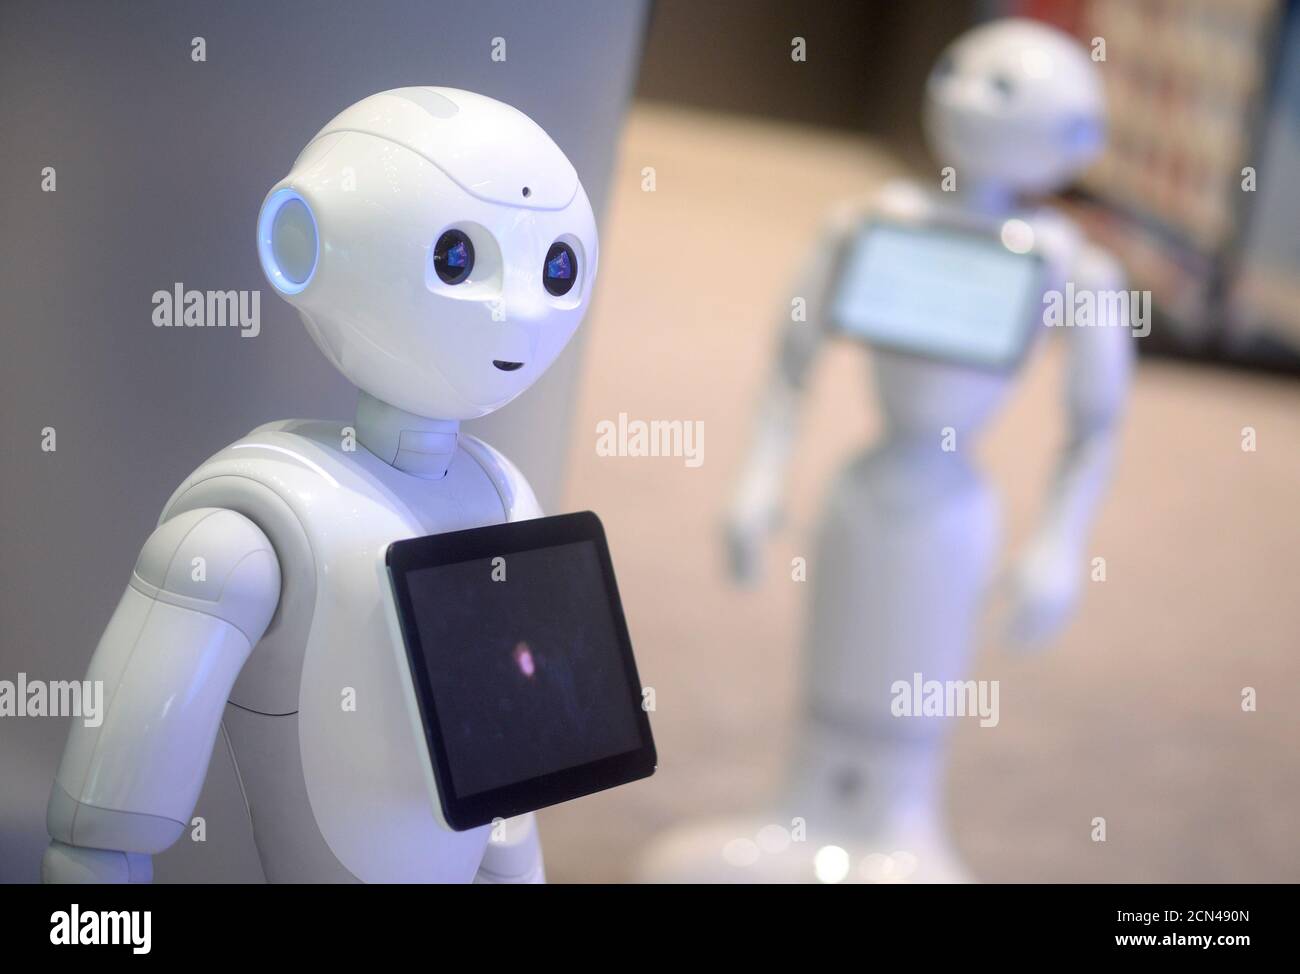 Humanoid robot Pepper is seen at IBM exhibition stand during the CeBIT trade fair, world's biggest computer and software in Hannover March 2016. REUTERS/Nigel Treblin Stock Photo - Alamy